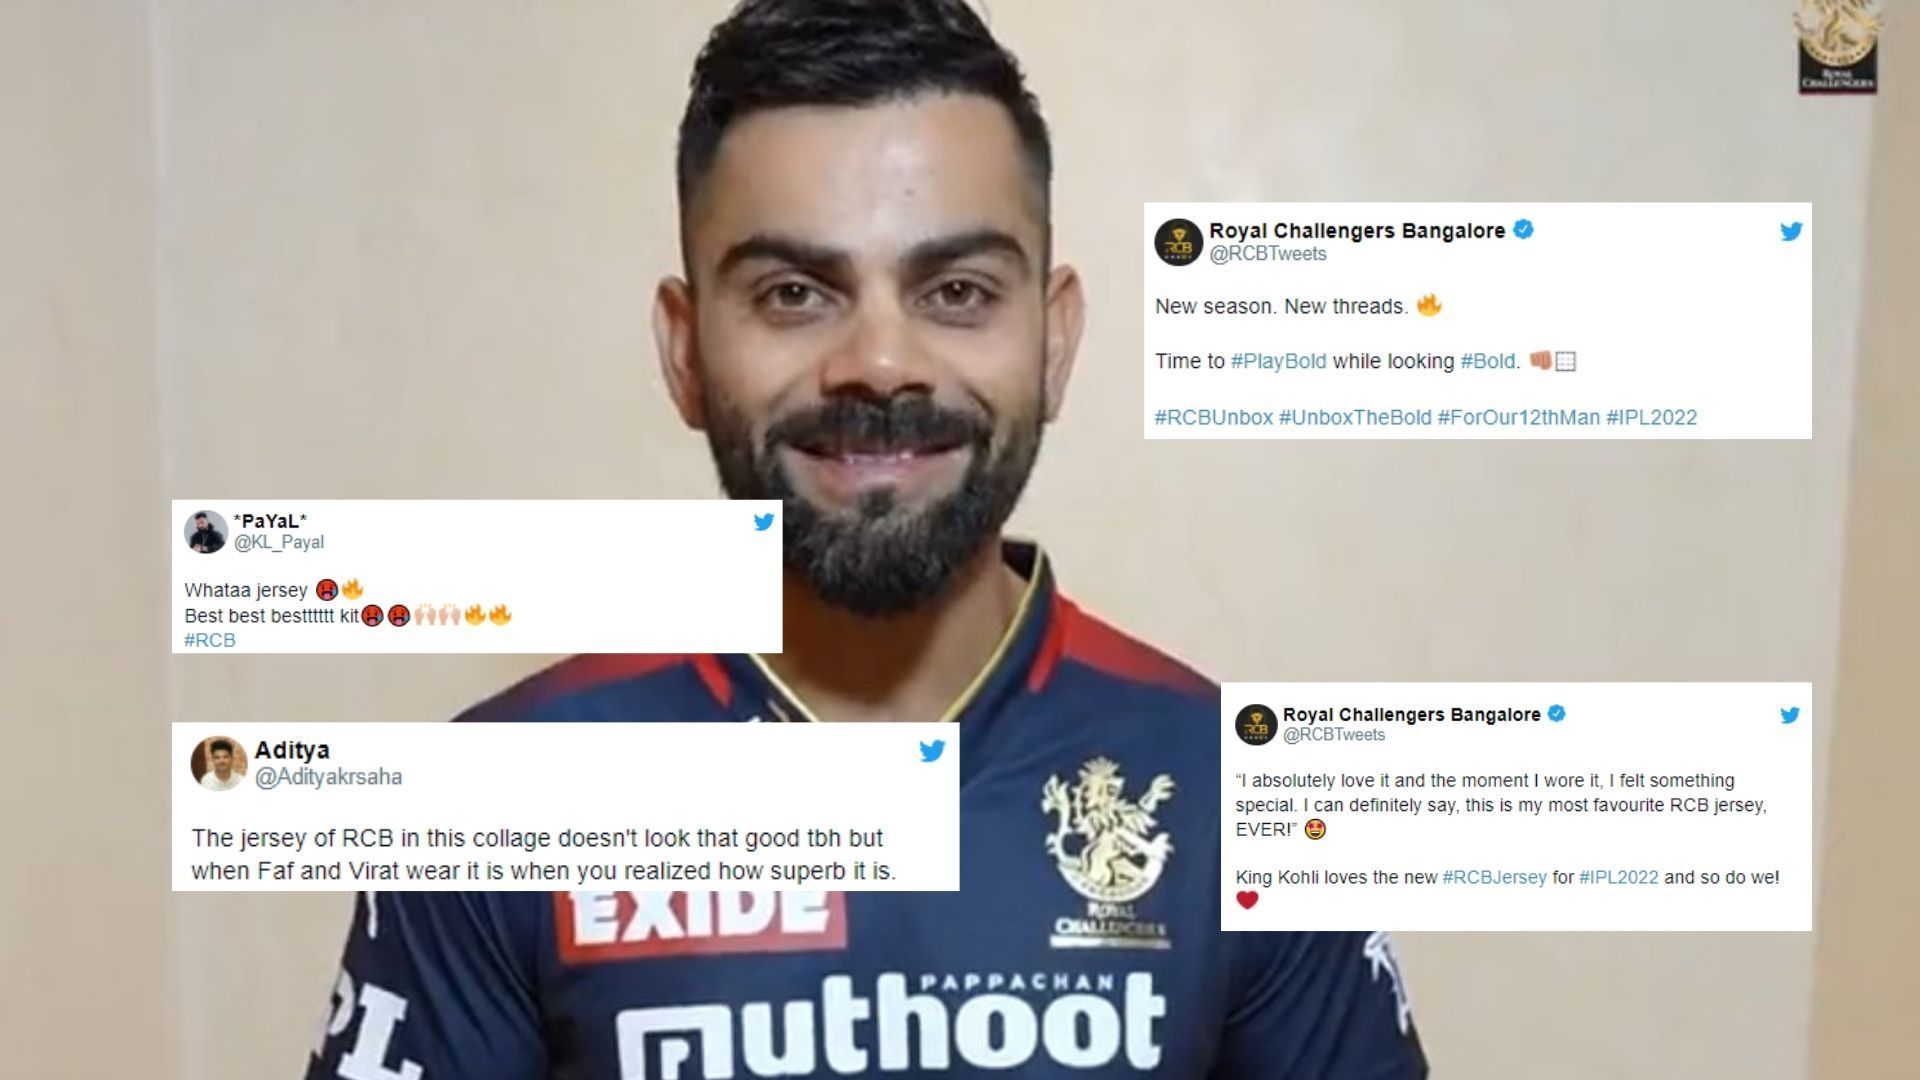 Virat Kohli as well as the fans were thrilled with the new Royal Challengers Bangalore jersey